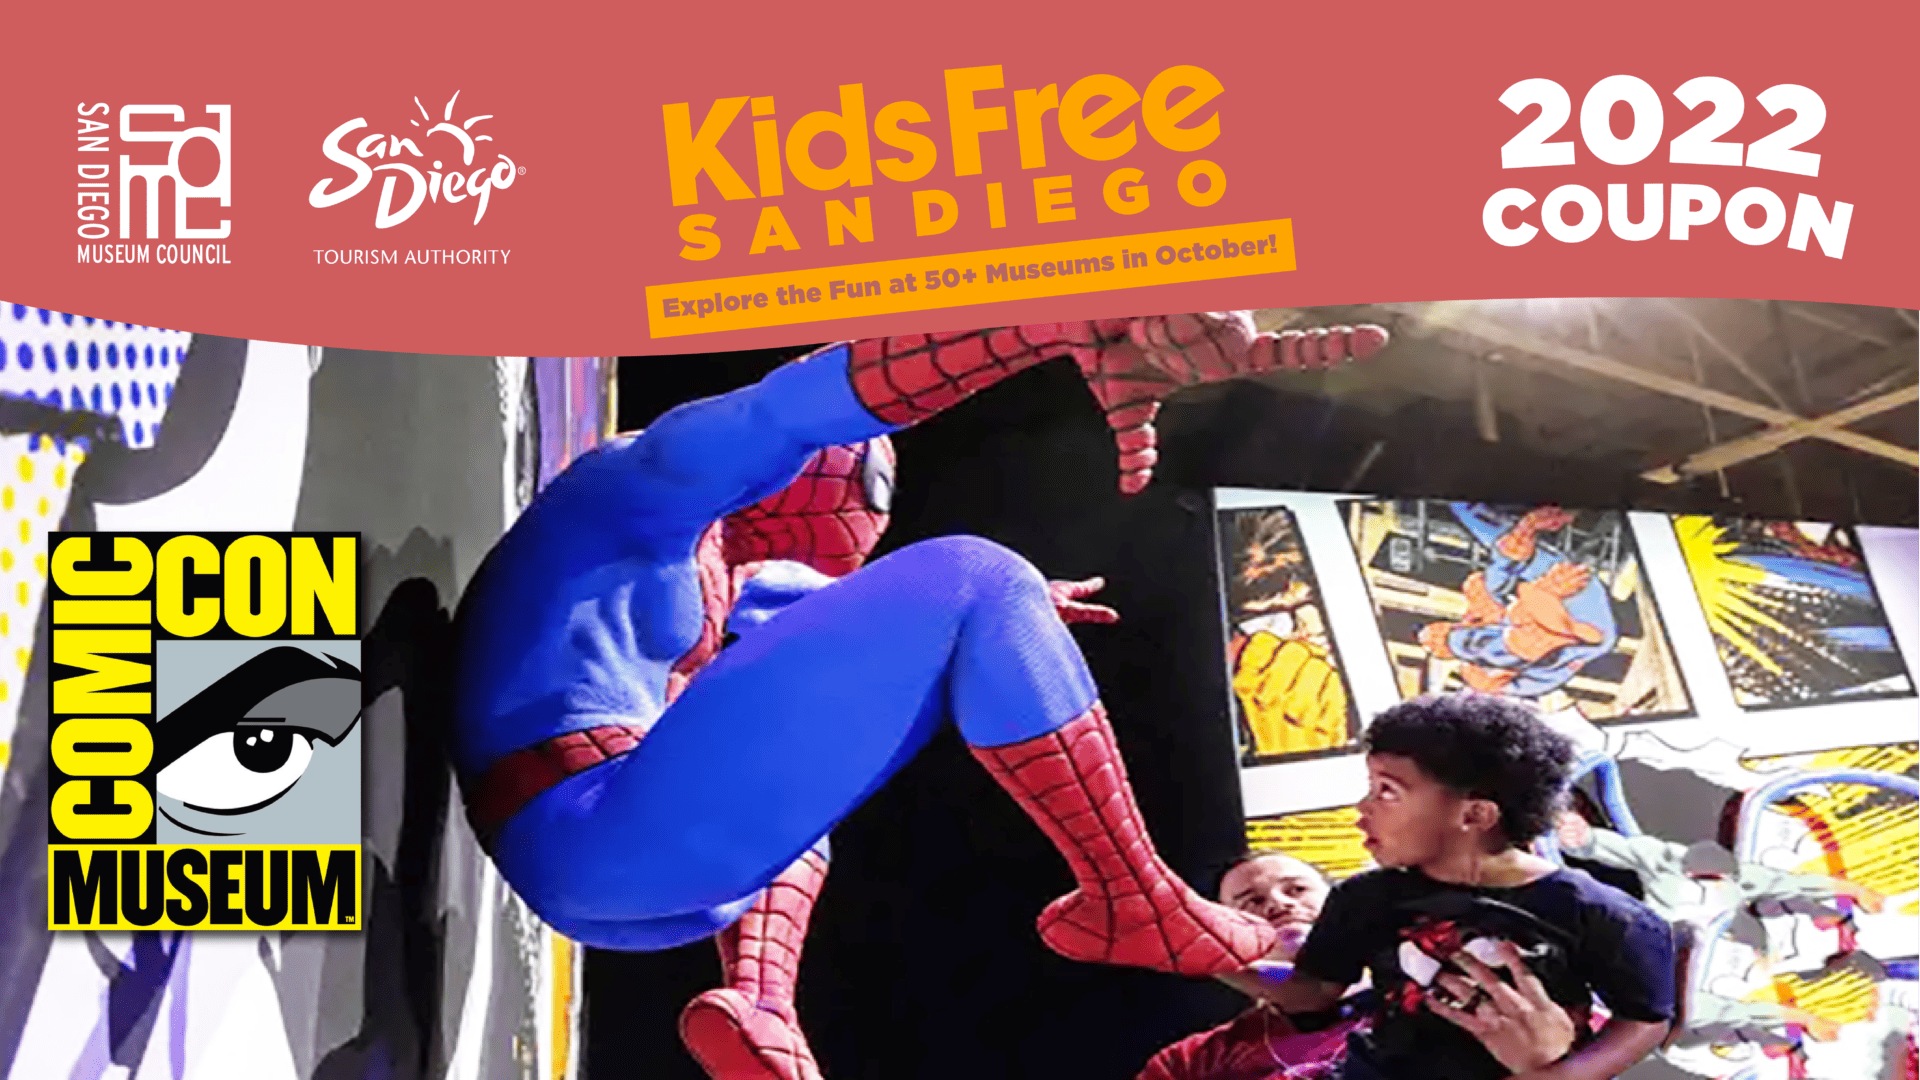 ComicCon Kids Free 2022 Coupon San Diego Museum Council